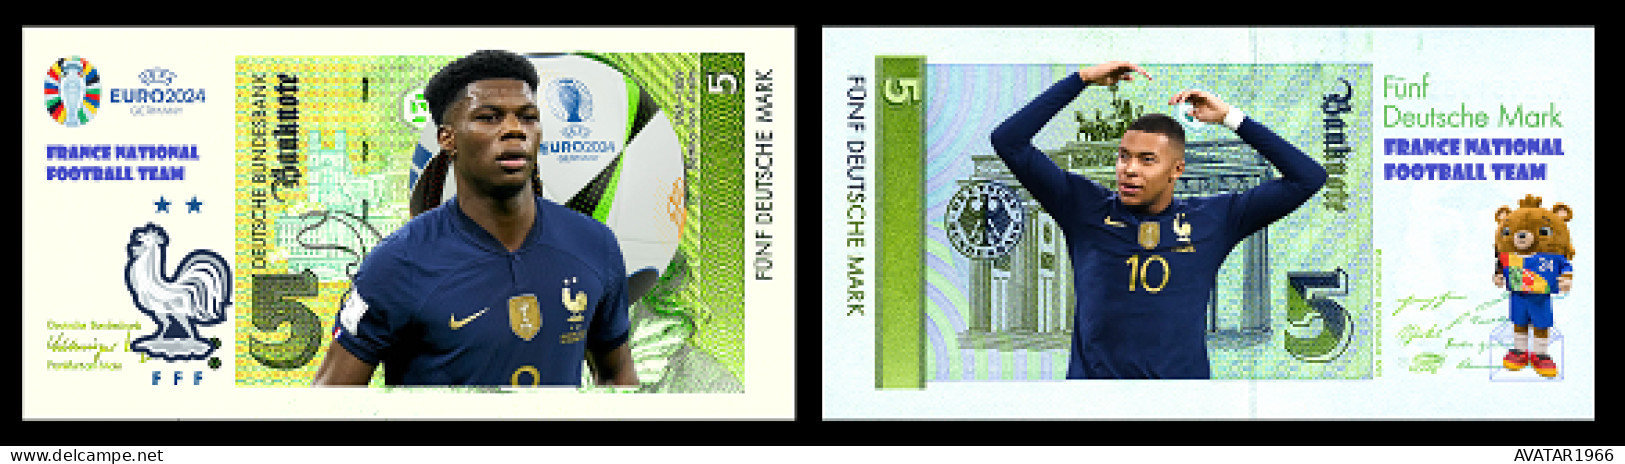 UEFA European Football Championship 2024 Qualified Country  France 8 Pieces Germany Fantasy Paper Money - Gedenkausgaben